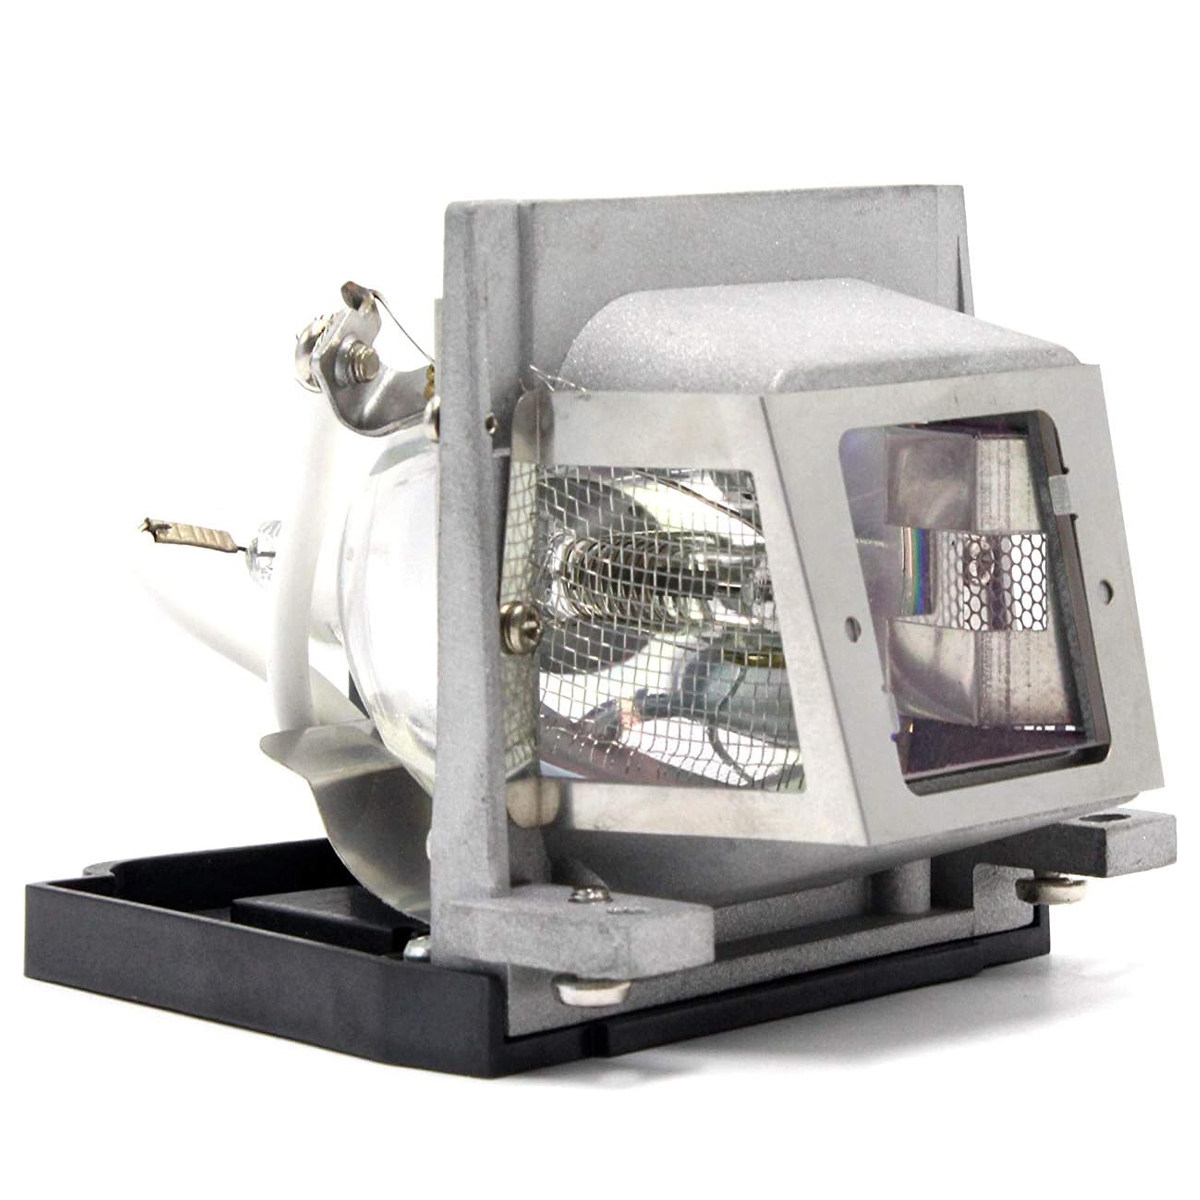 Replacement Projector lamp VLT-XD470LP For MITSUBISHI XD470